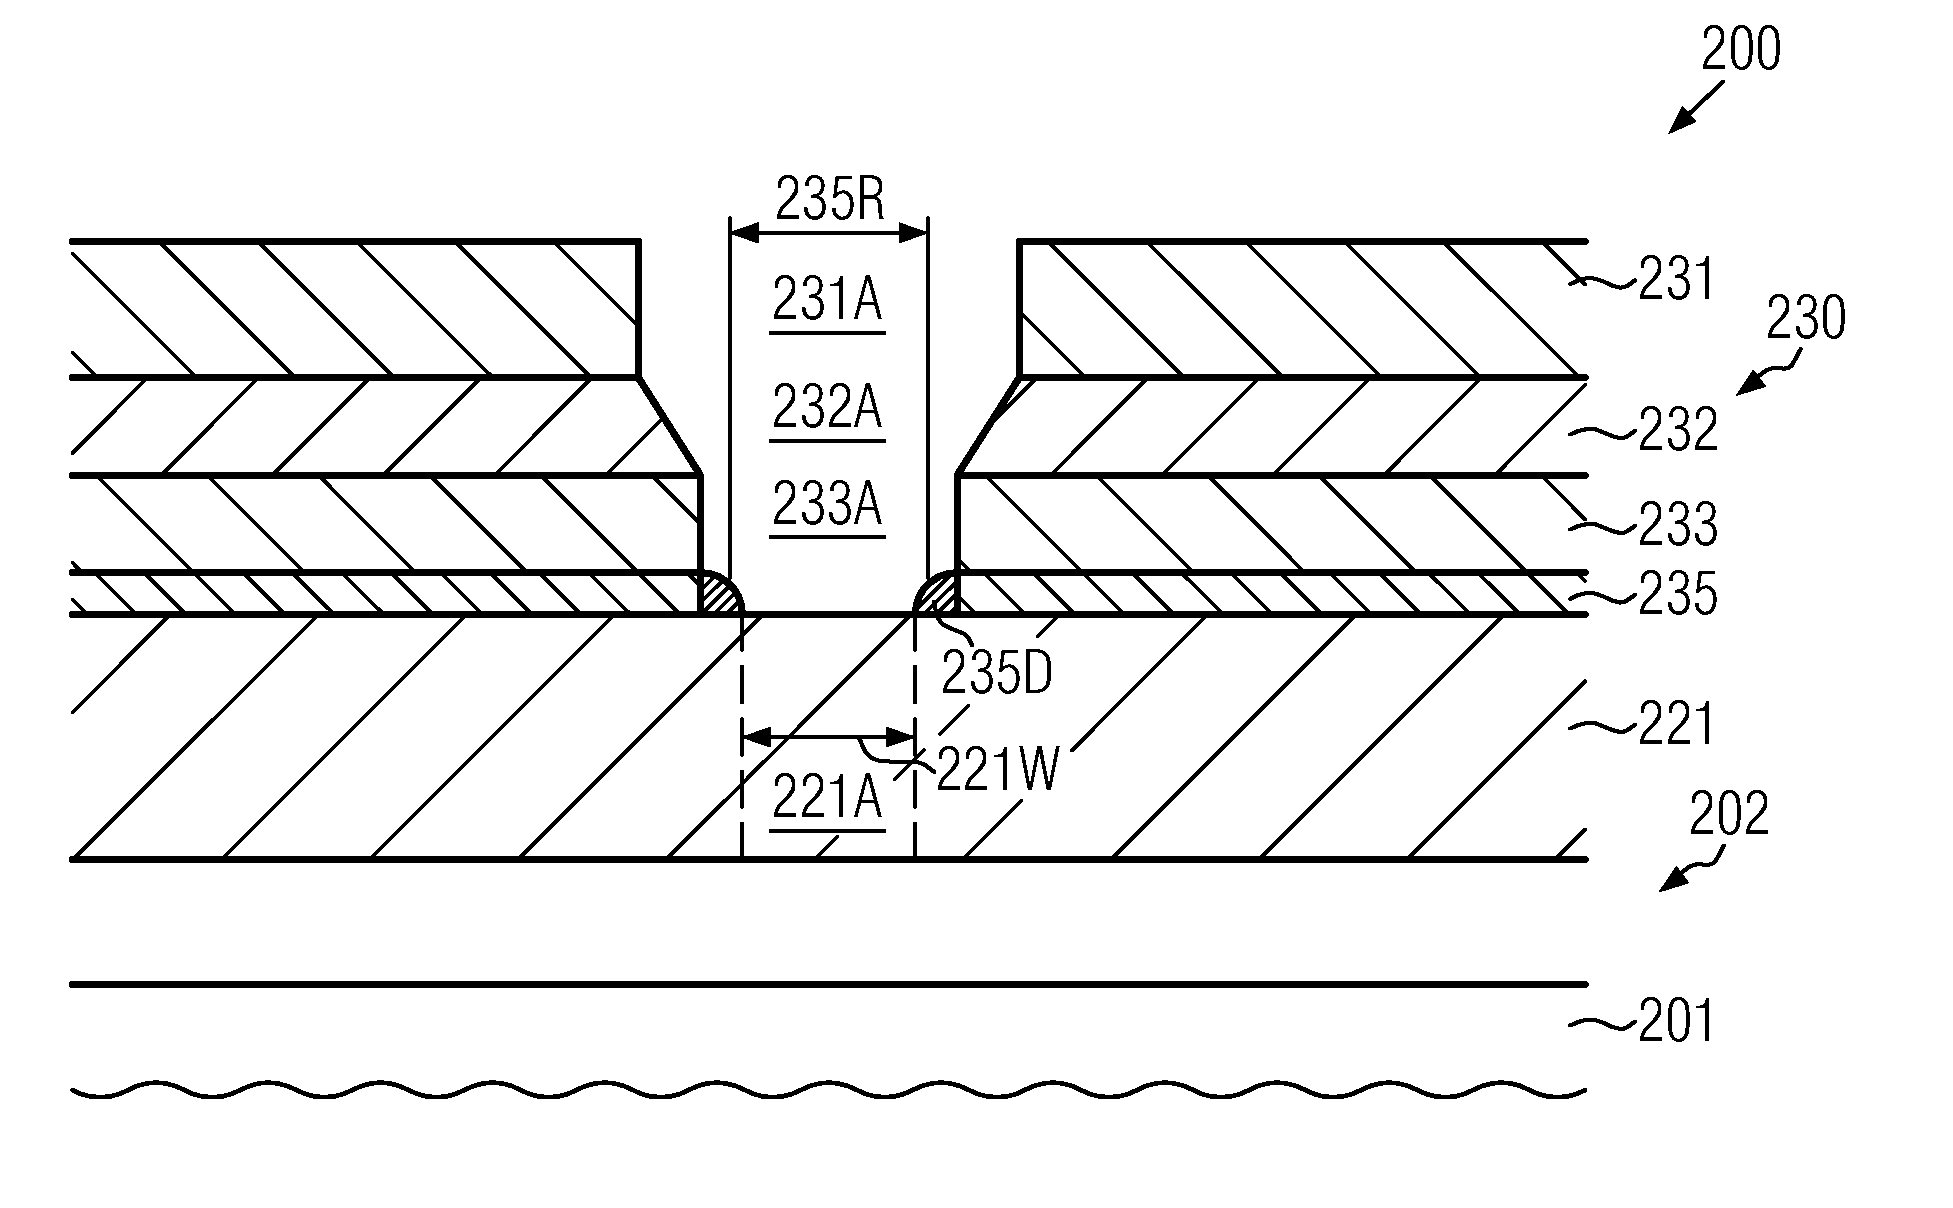 Shrinkage of critical dimensions in a semiconductor device by selective growth of a mask material